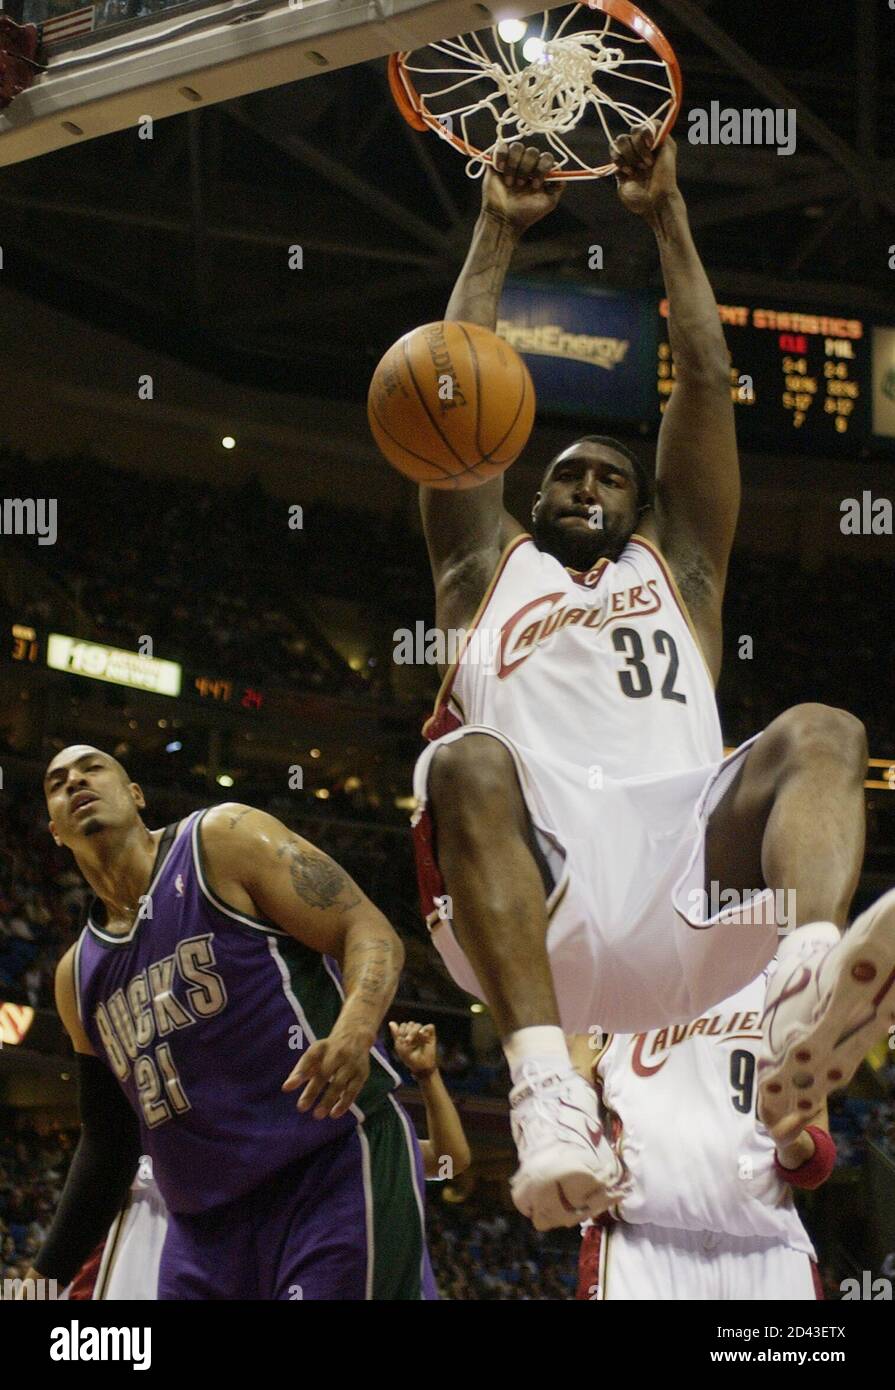 Robert Traylor of the Cleveland Cavaliers dunks ball as Marcus Fizer of the  Milwaukee Bucks looks on in the second quarter of game at Gund Arena in  Cleveland, Ohio, April 9, 2005.